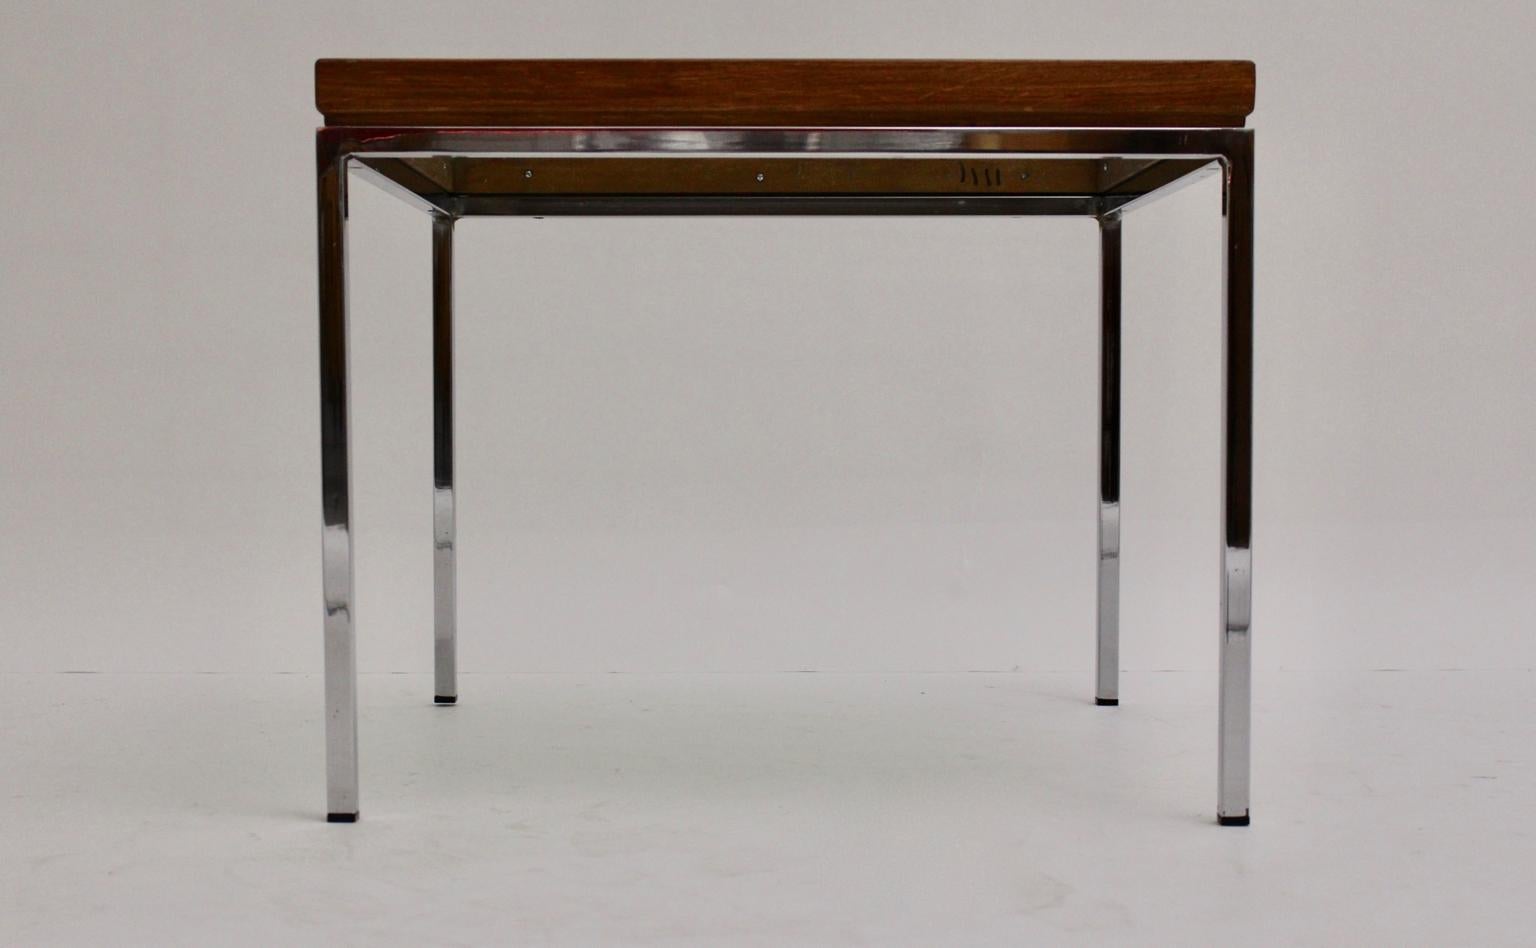 Modernist vintage coffee table shows a pure design from the 1970s. The coffee table by Wiesner- Hager, Austria features a chromed base with a solid oak frame and a smoked glass top.
Very good condition with minor signs of age.

approx. measures: